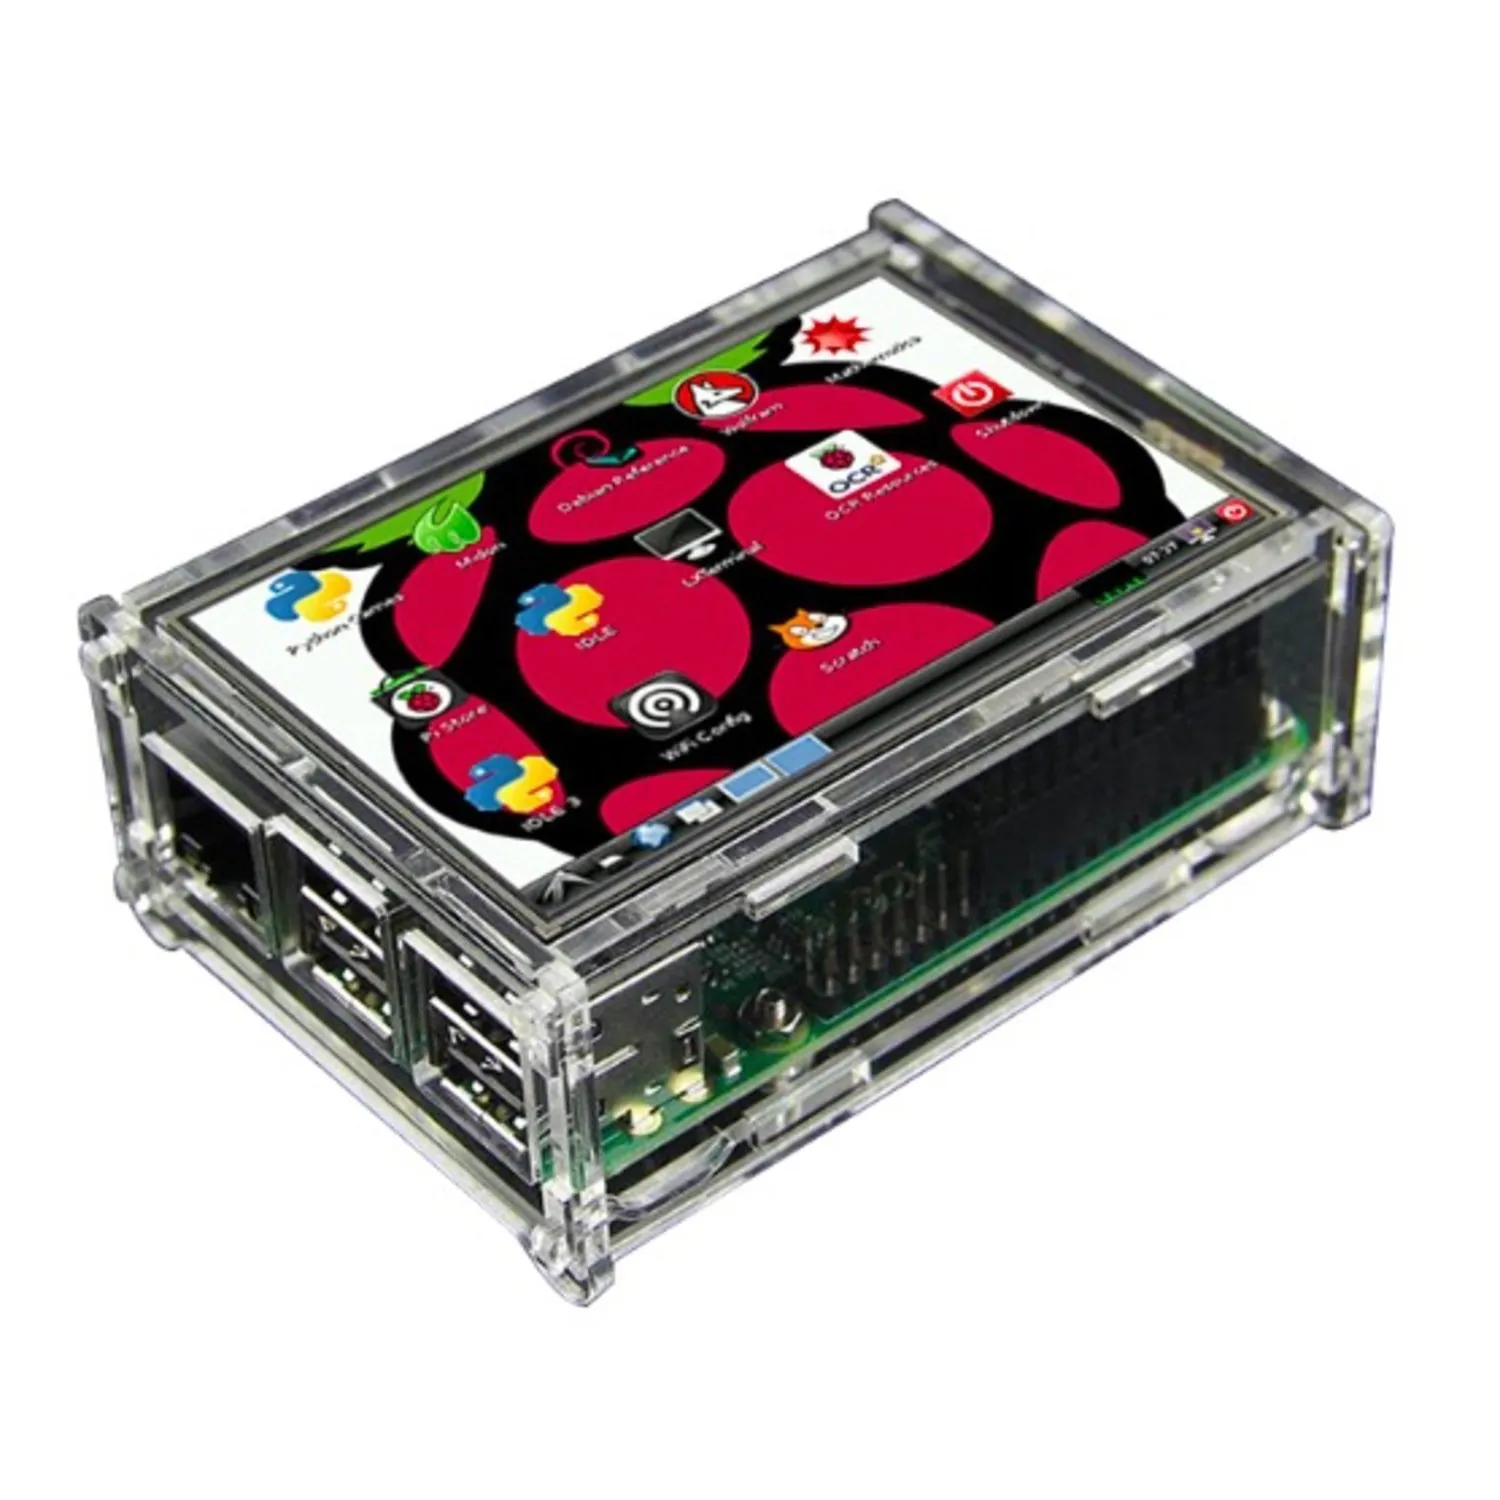 Photo of Acrylic Case for Raspberry Pi 3.5inch LCD Display